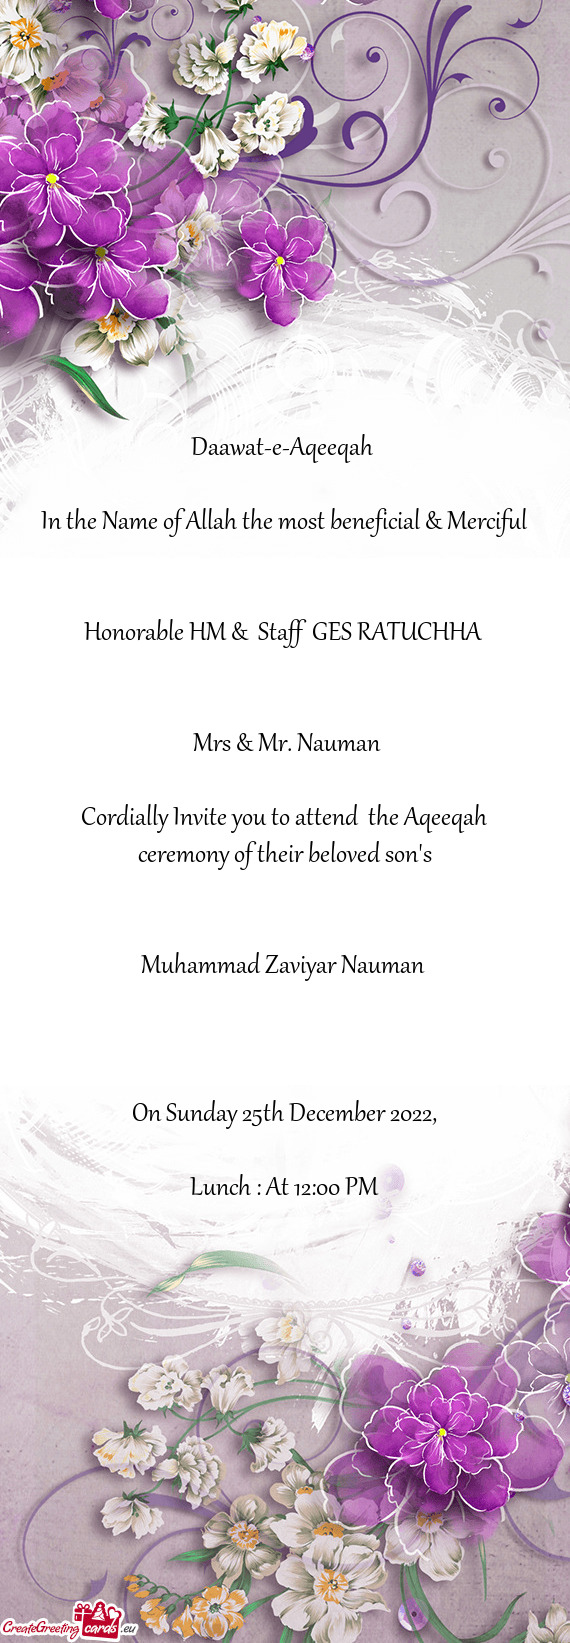 Cordially Invite you to attend the Aqeeqah ceremony of their beloved son